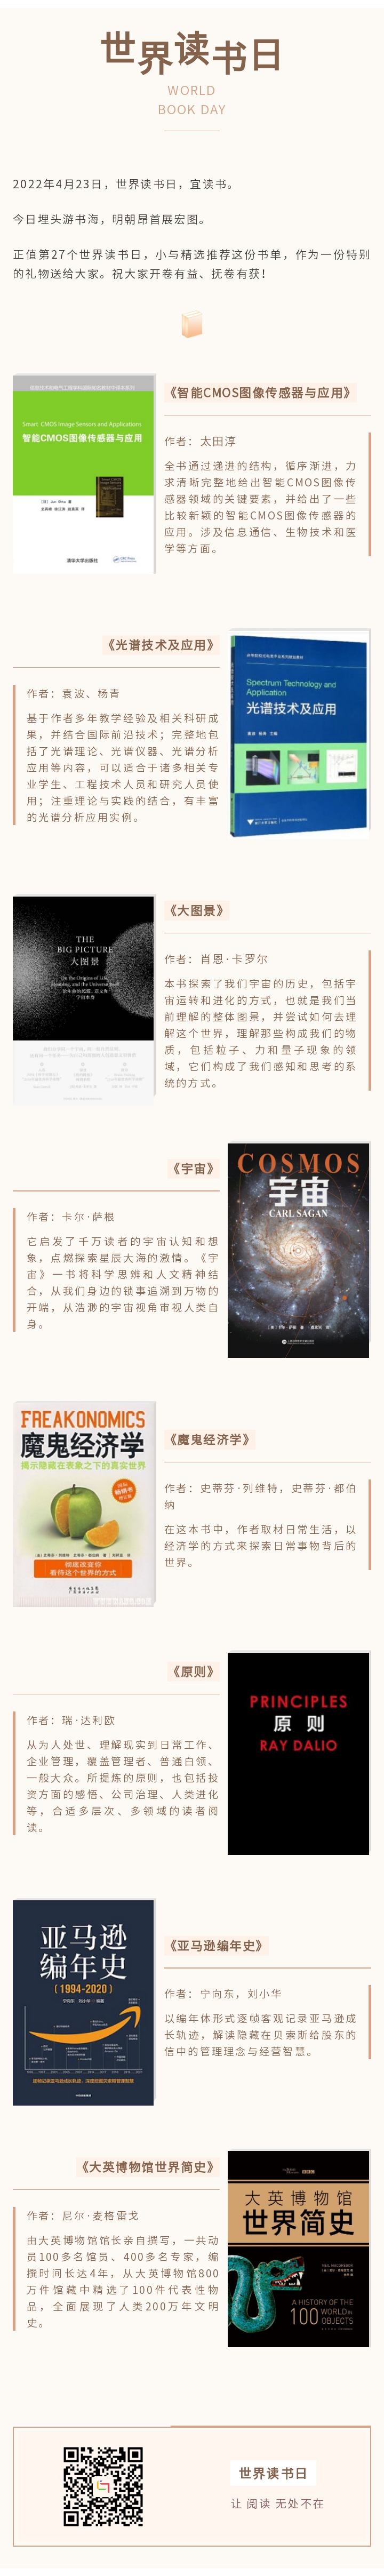 World Book Day | Xiao Yus selection of books(图1)